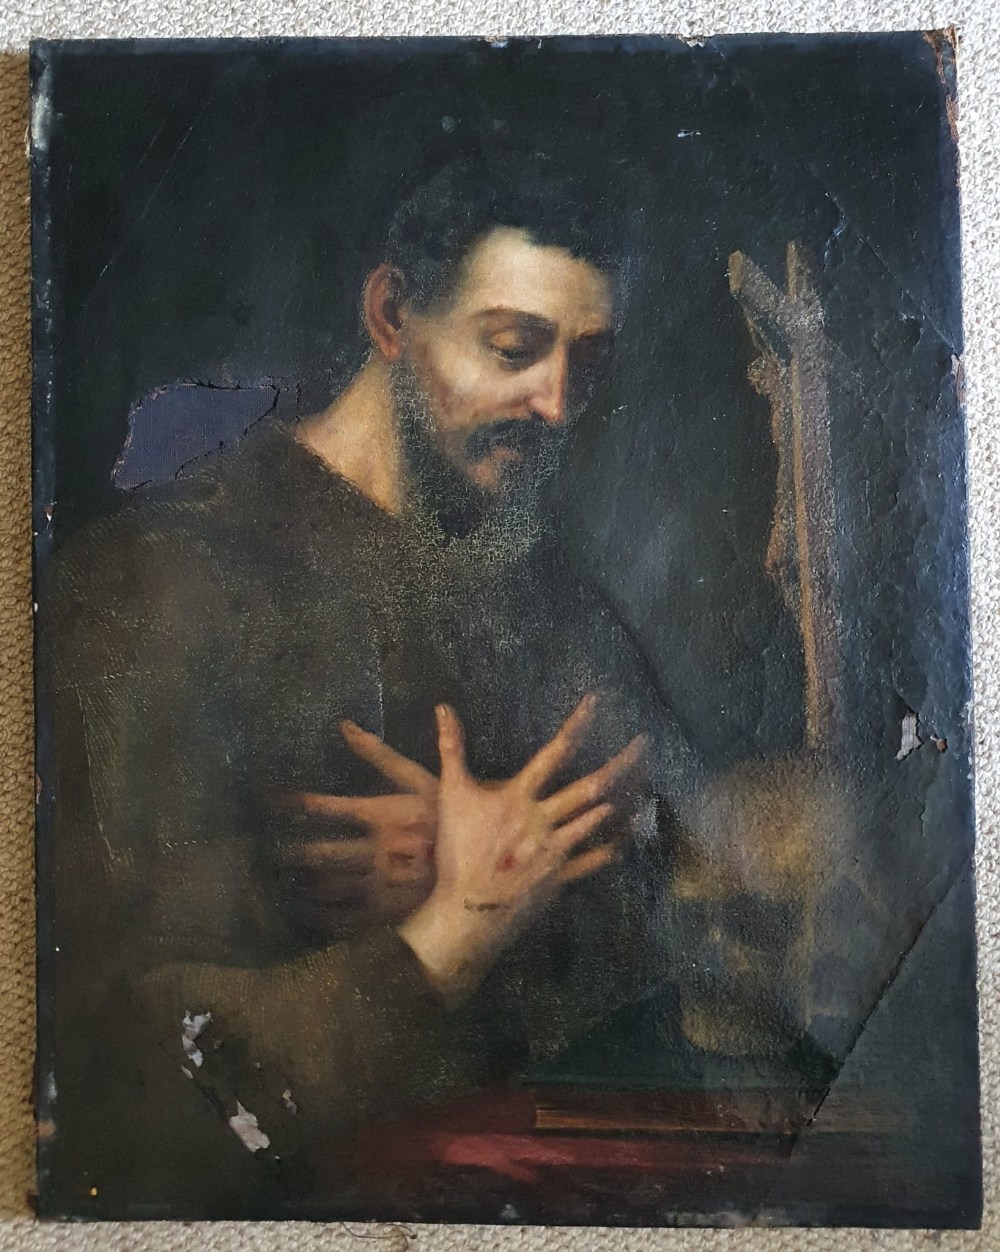 An antique oil on canvas depicting a monk in contemplation before a crucifix and skull, 29" x 22.